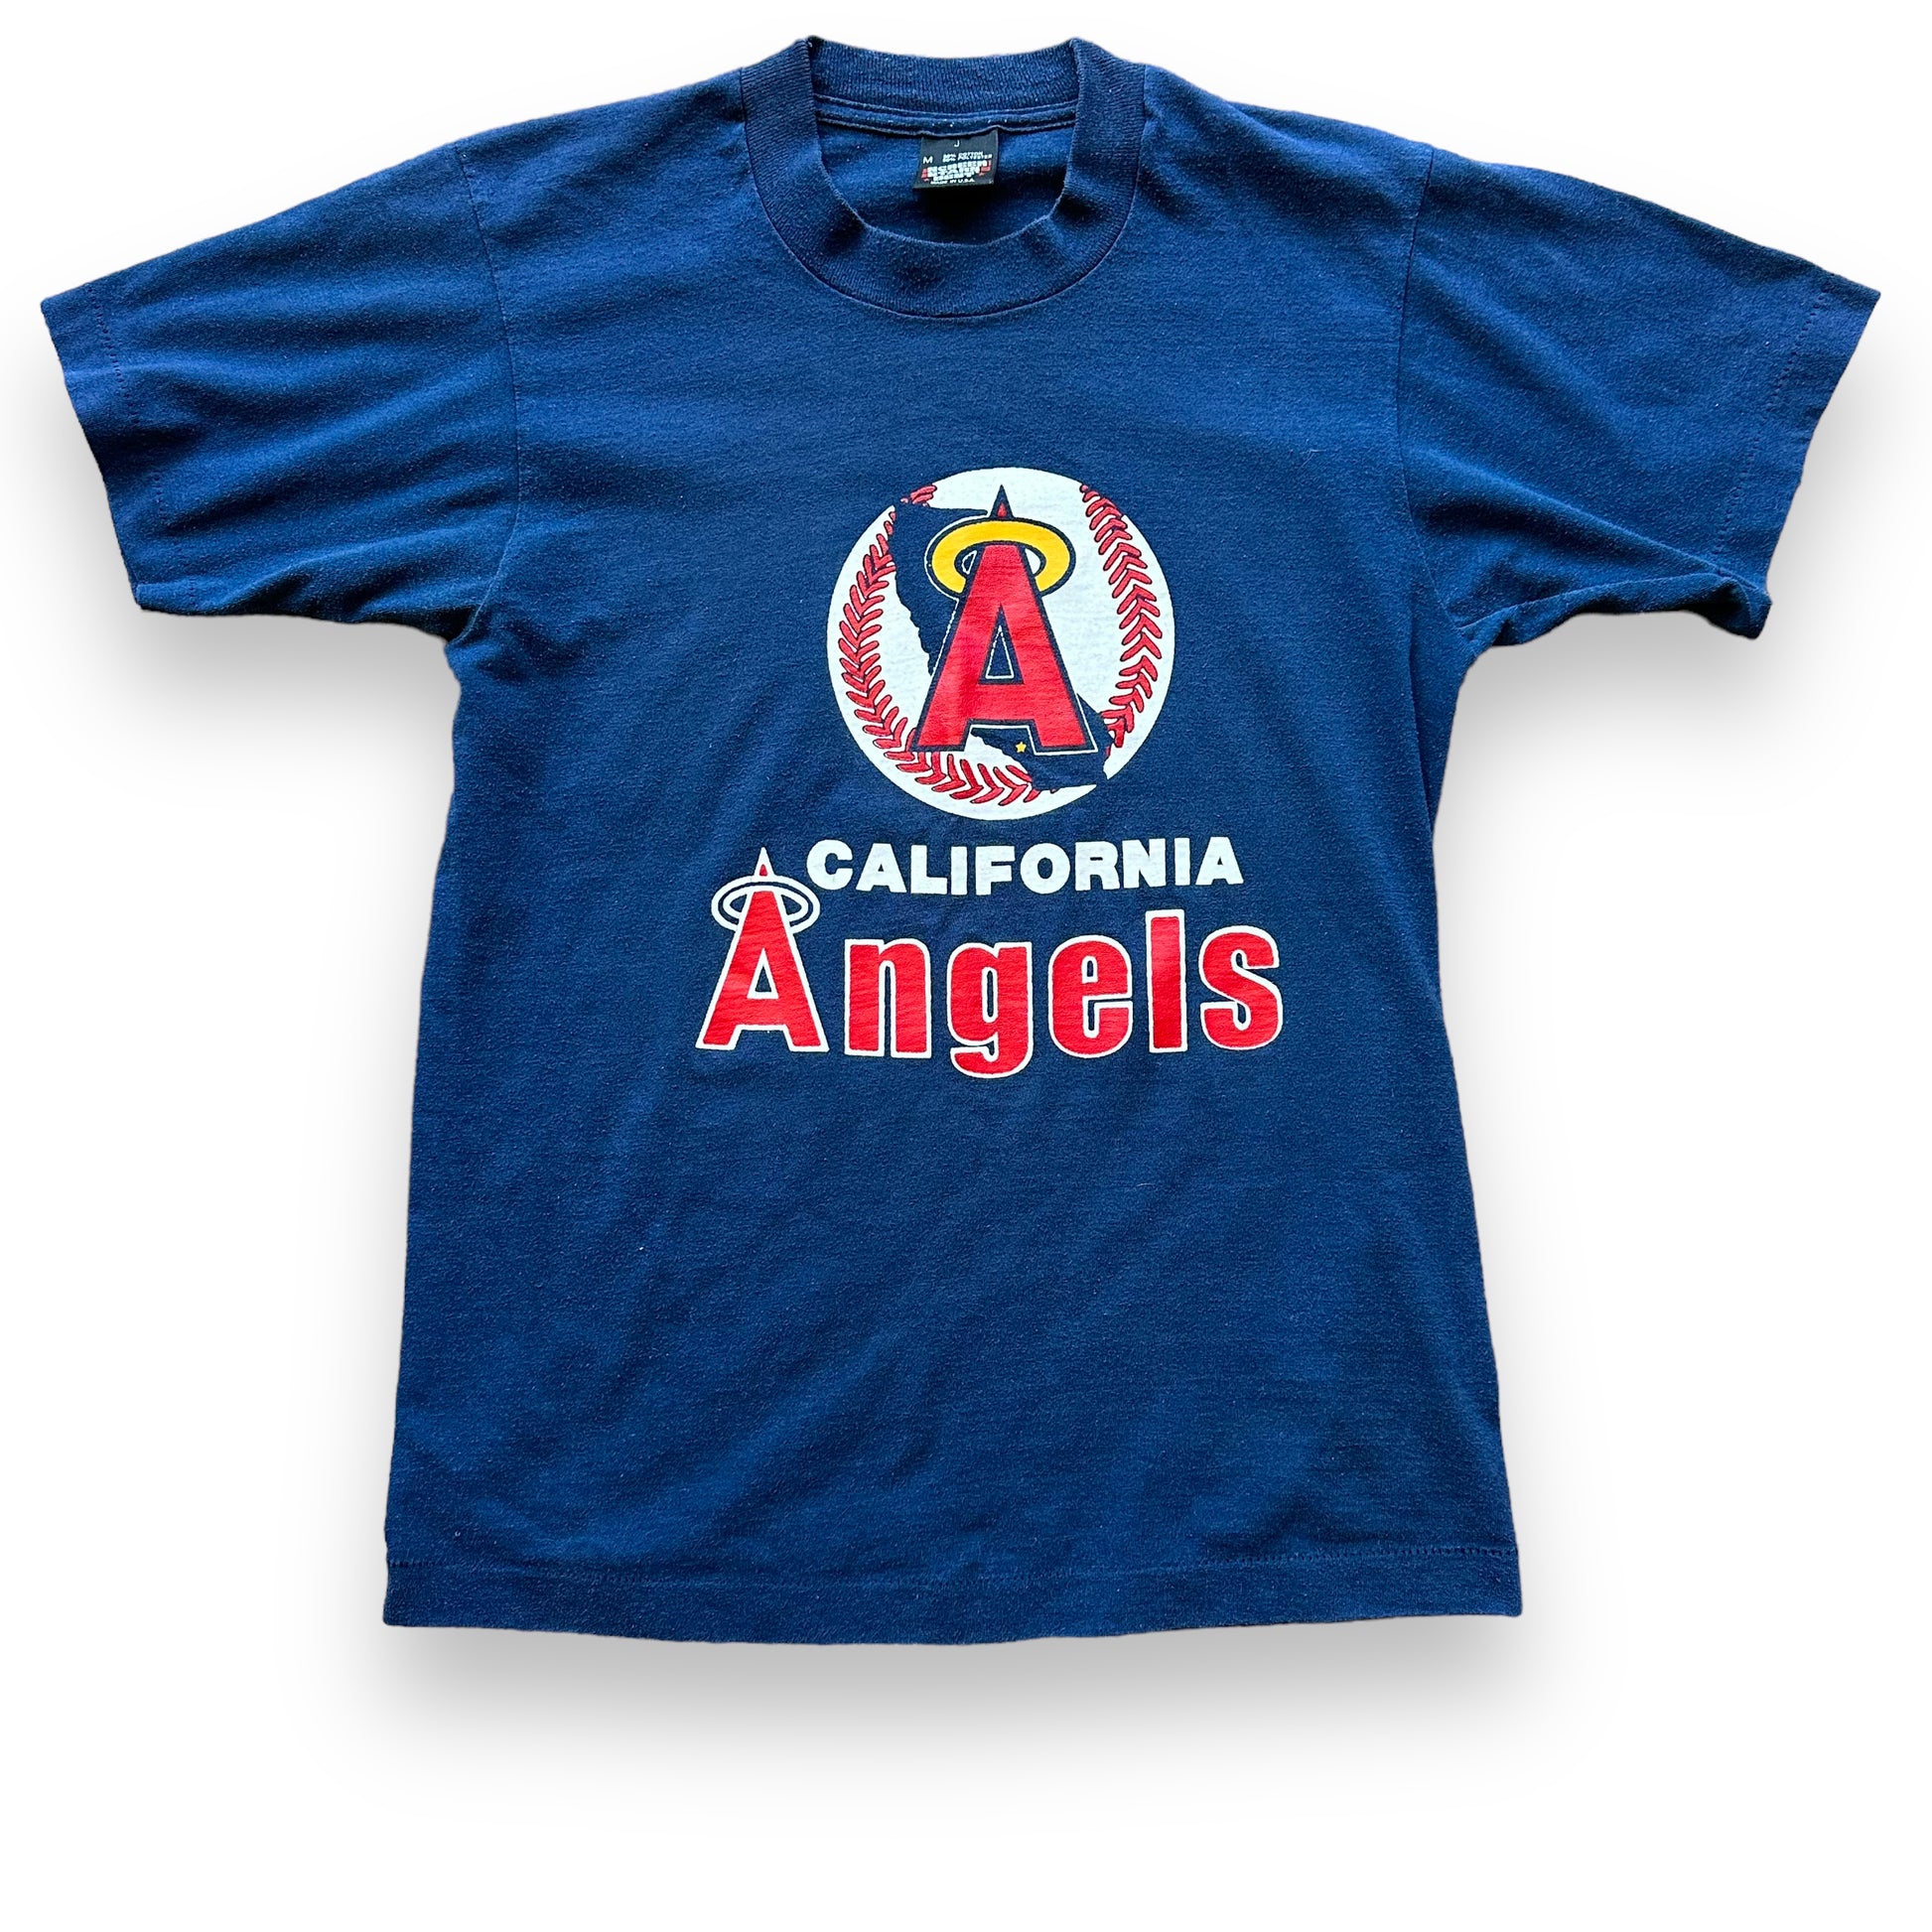 Front View of Vintage California Angels Tee SZ M | Vintage Anaheim Angels T-Shirts Seattle | Barn Owl Vintage Tees Seattle